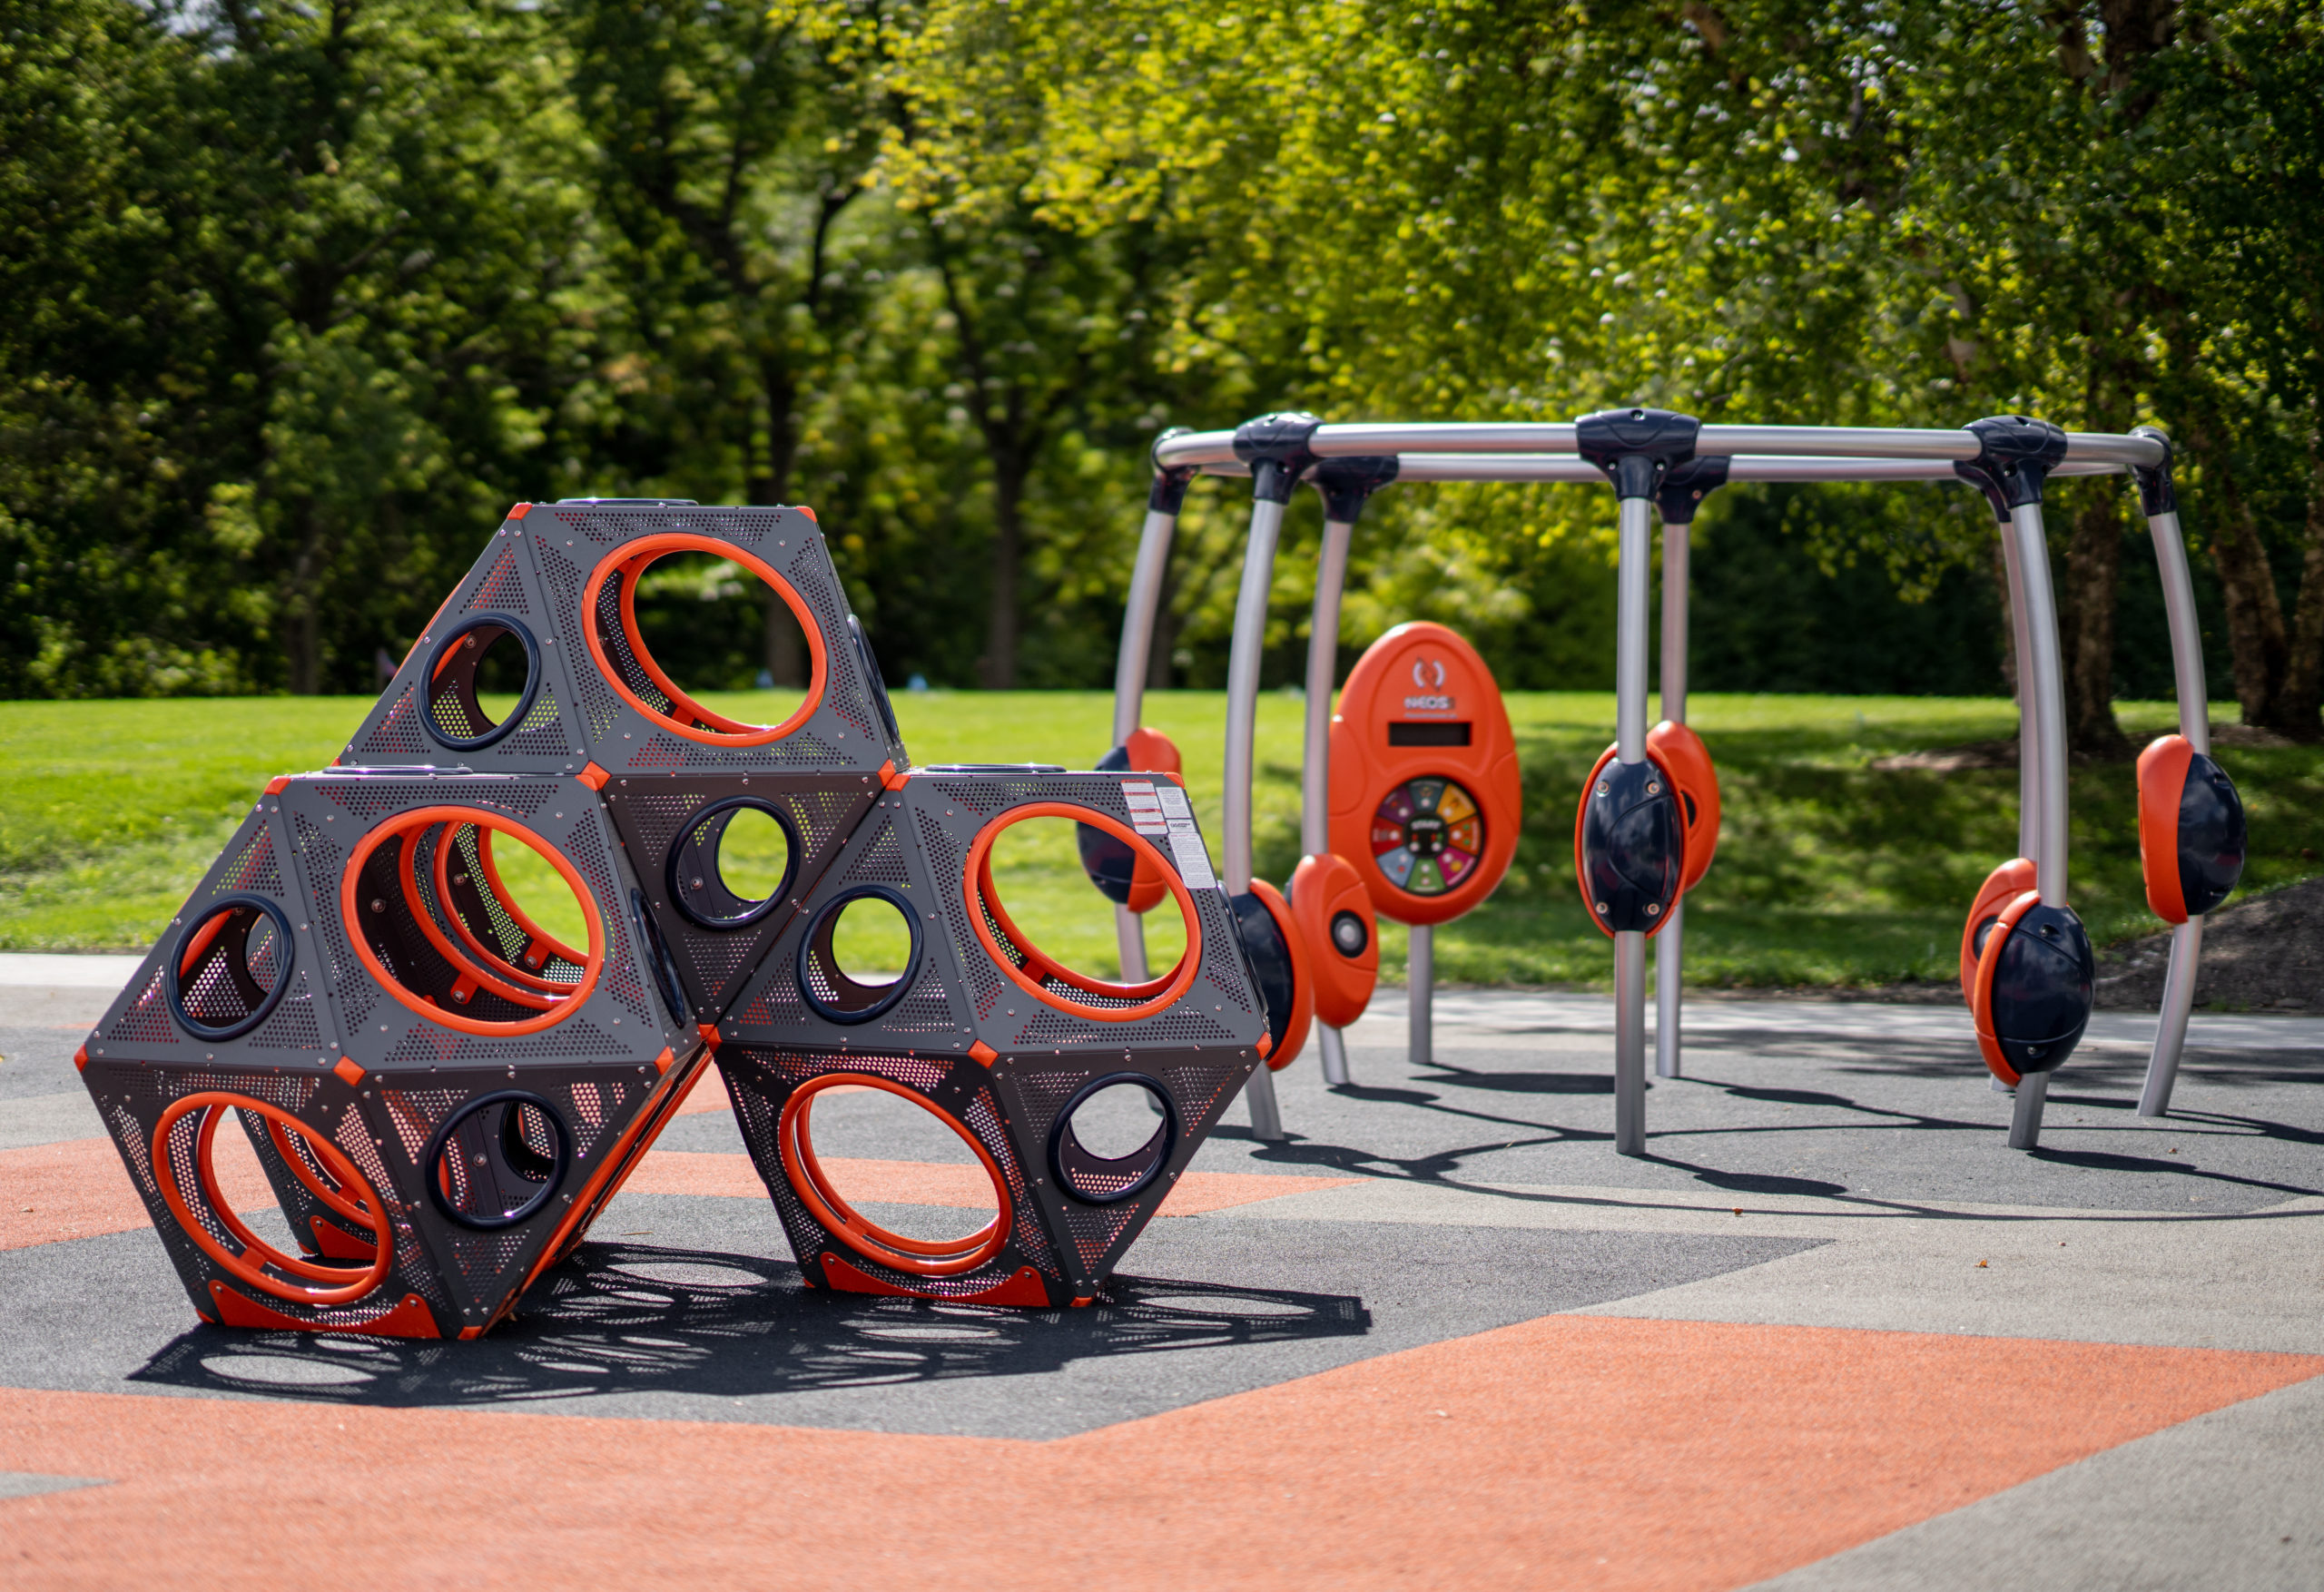 Newly Reimagined River Heritage Park features a new spongy playground surface, accessible play equipment and sensory friendly play activities.